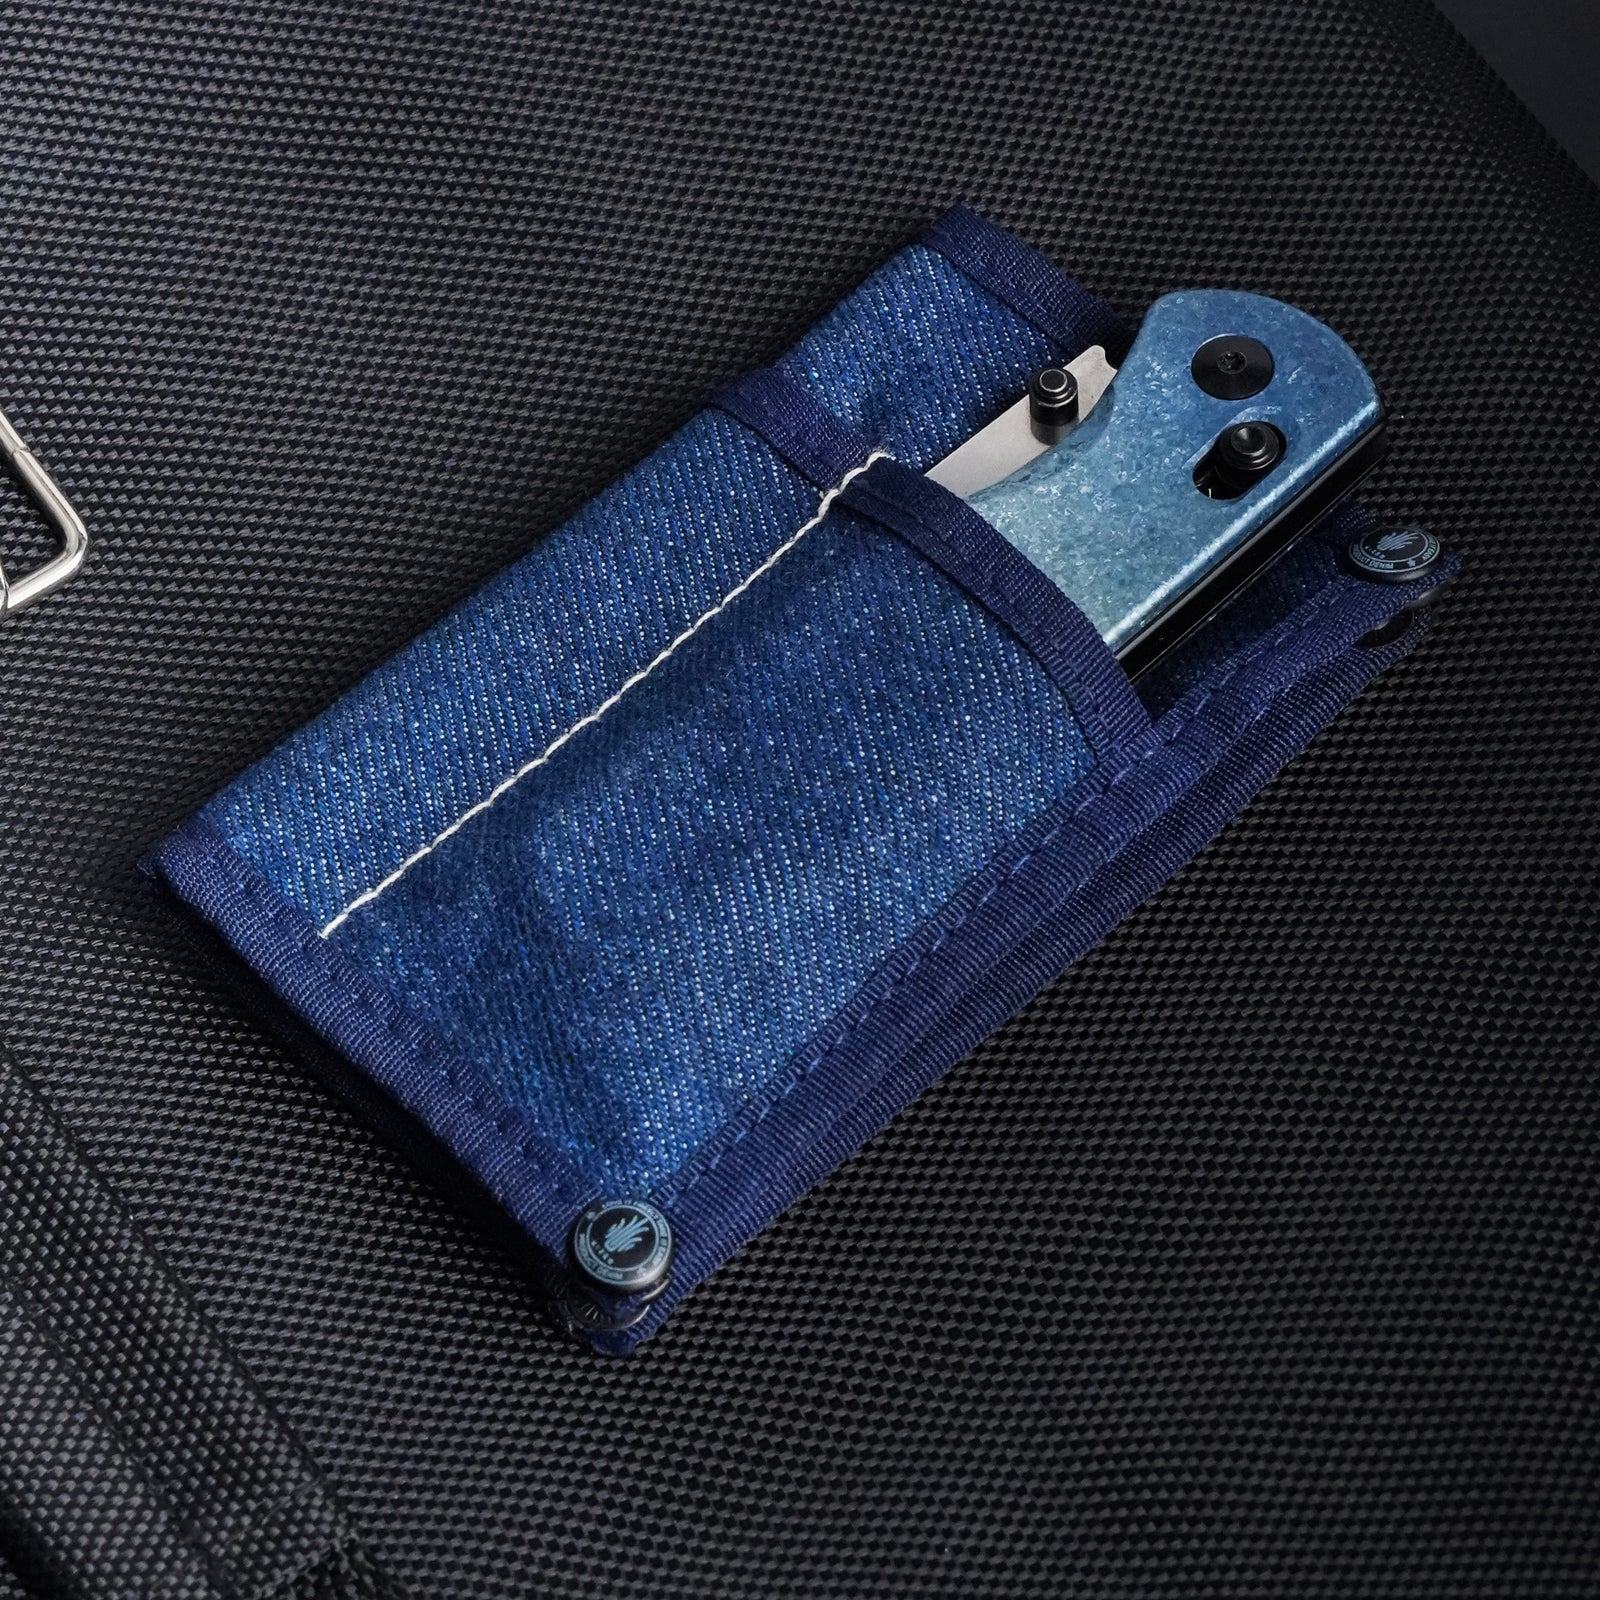 Kizer Denim Wallet D002(Out of stock in non-U.S. countries)